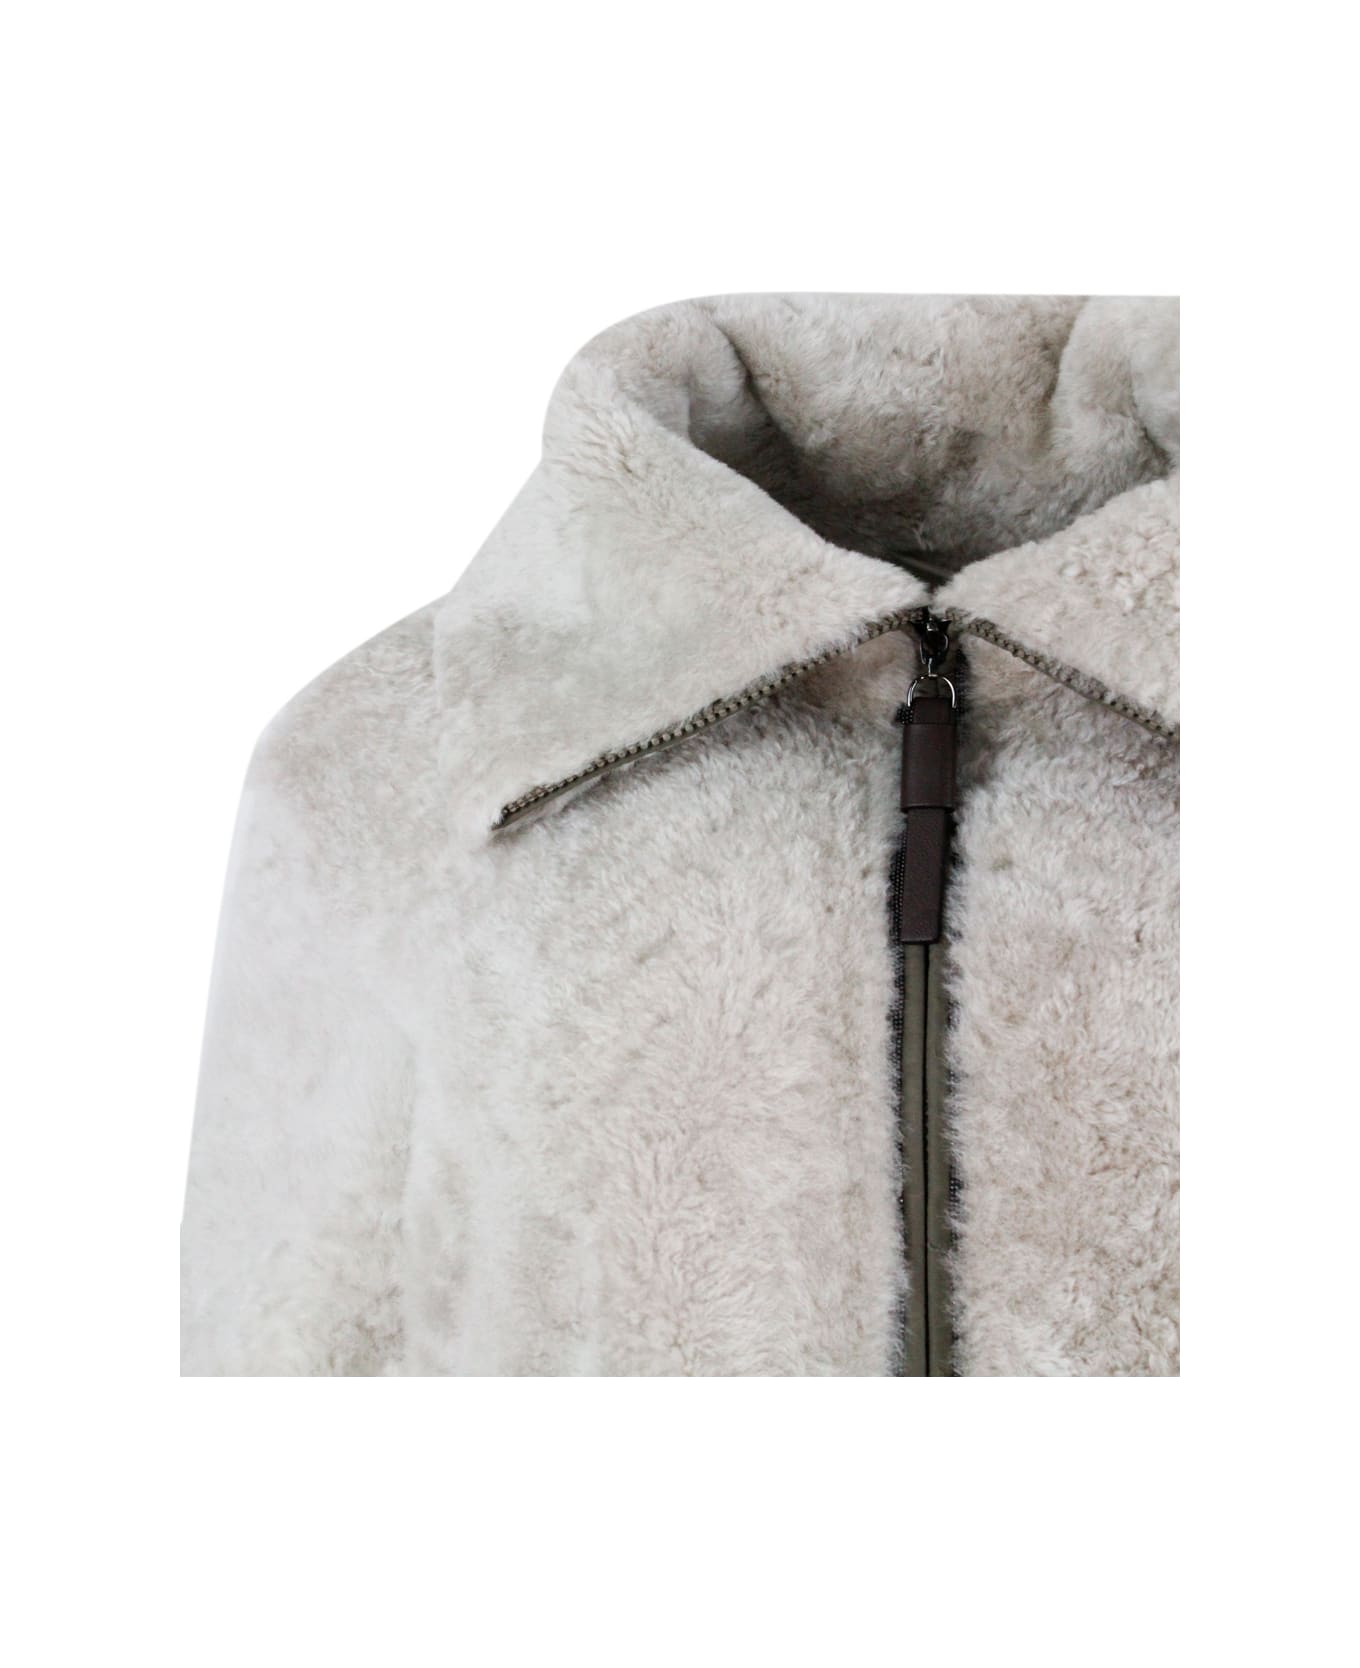 Brunello Cucinelli Long Coat In Precious And Refined Shearling Sheepskin With Zip Closure Embellished With Rows Of Brilliant Jewels And With Front Pockets - Beige コート